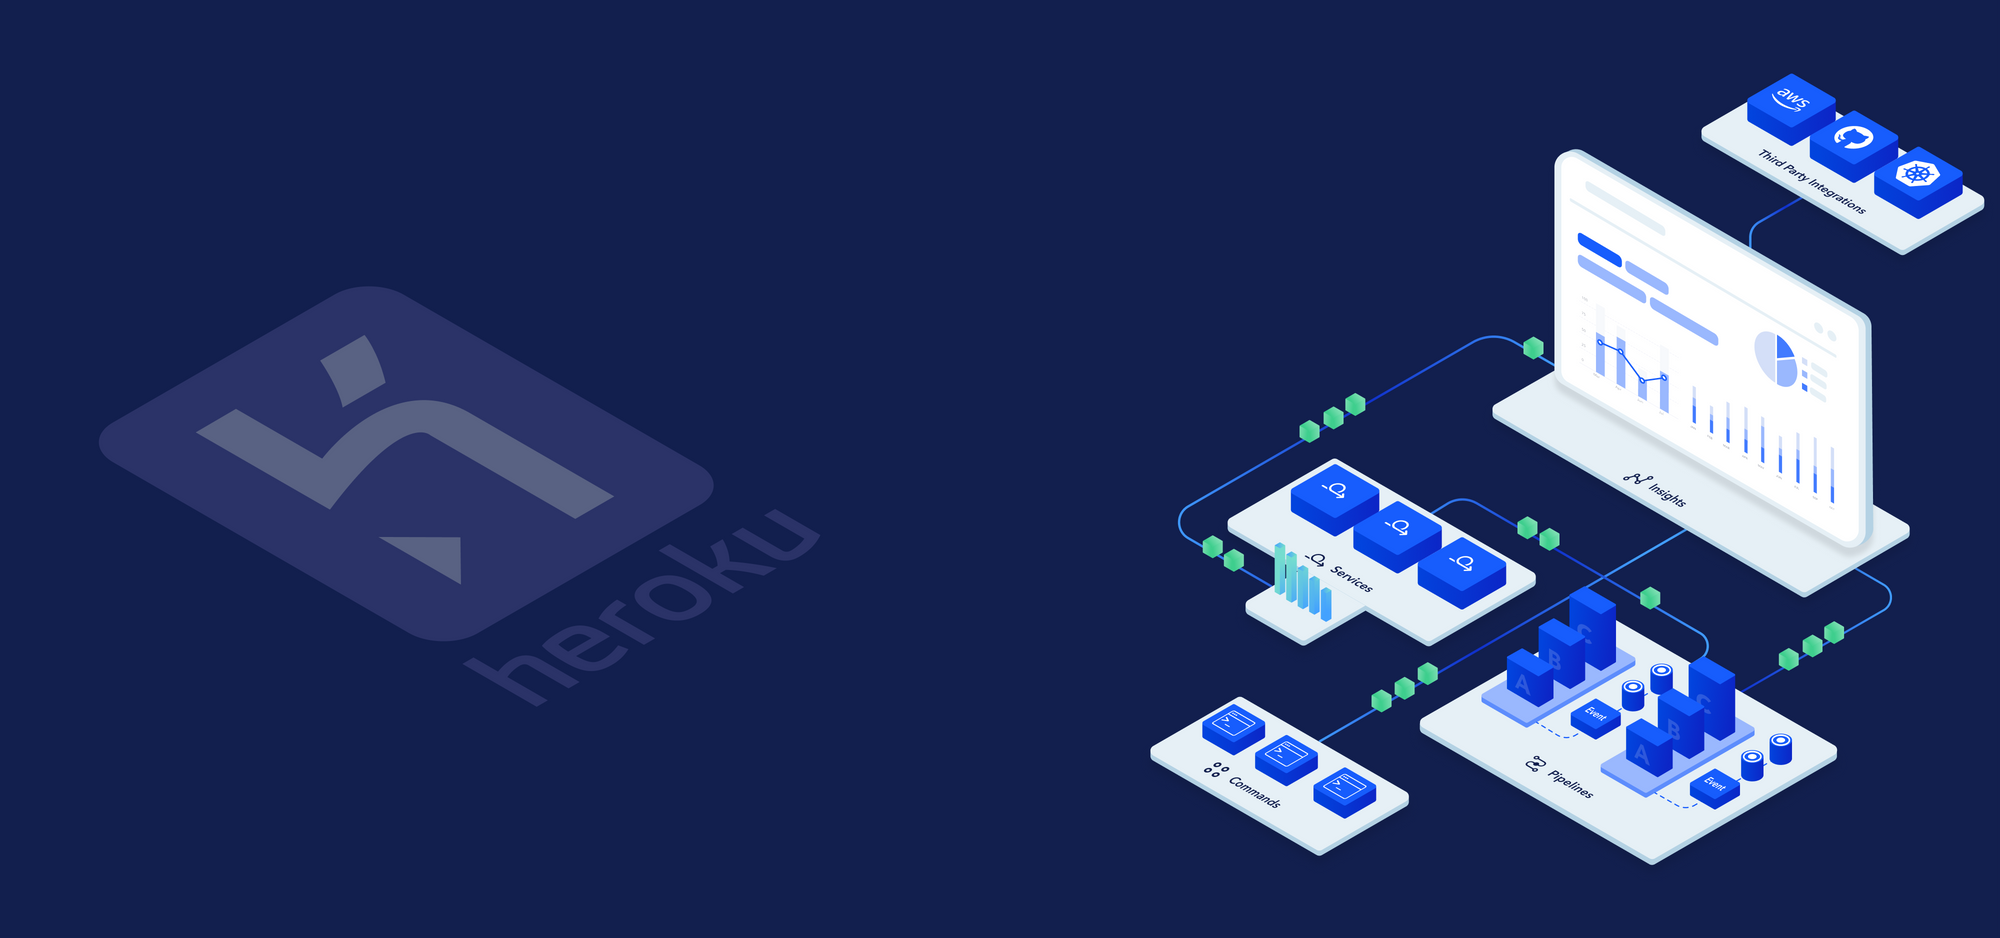 Looking to grow beyond the limitations of a one-size-fits-all PaaS like Heroku?